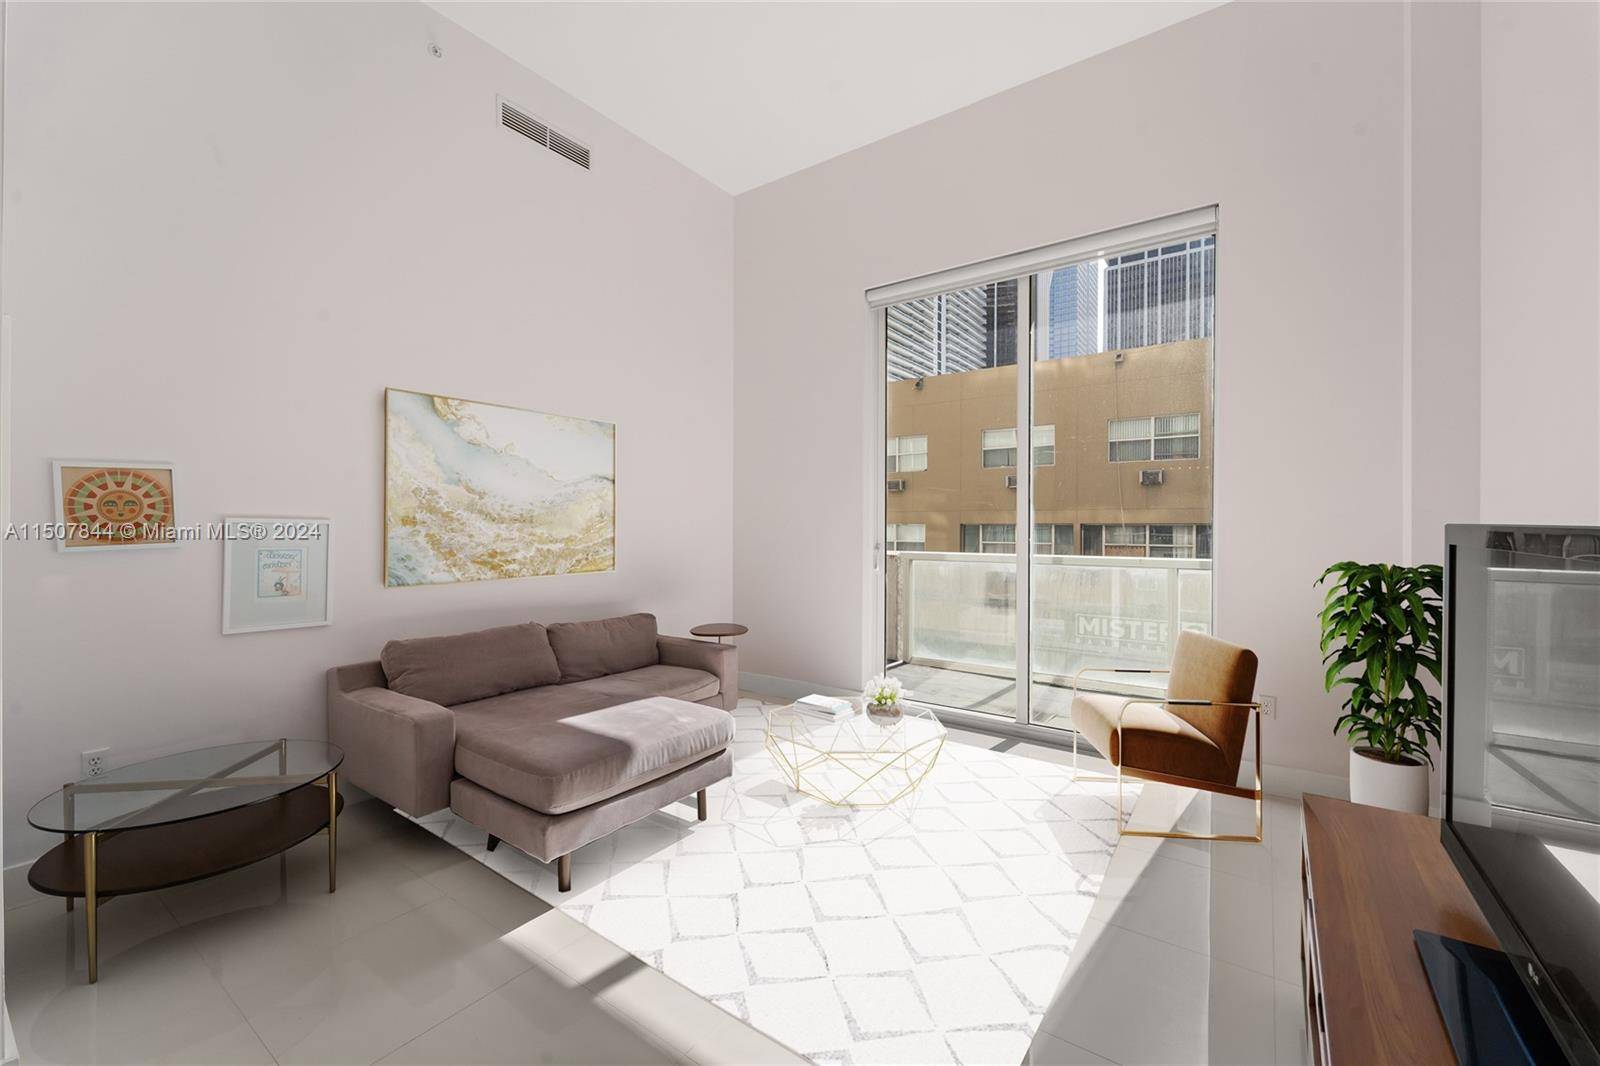 Become a part of Miami s downtown renaissance with this inviting 1 Bed plus Den 2 Bath residence at Vizcayne, conveniently situated across from Bayfront Park.